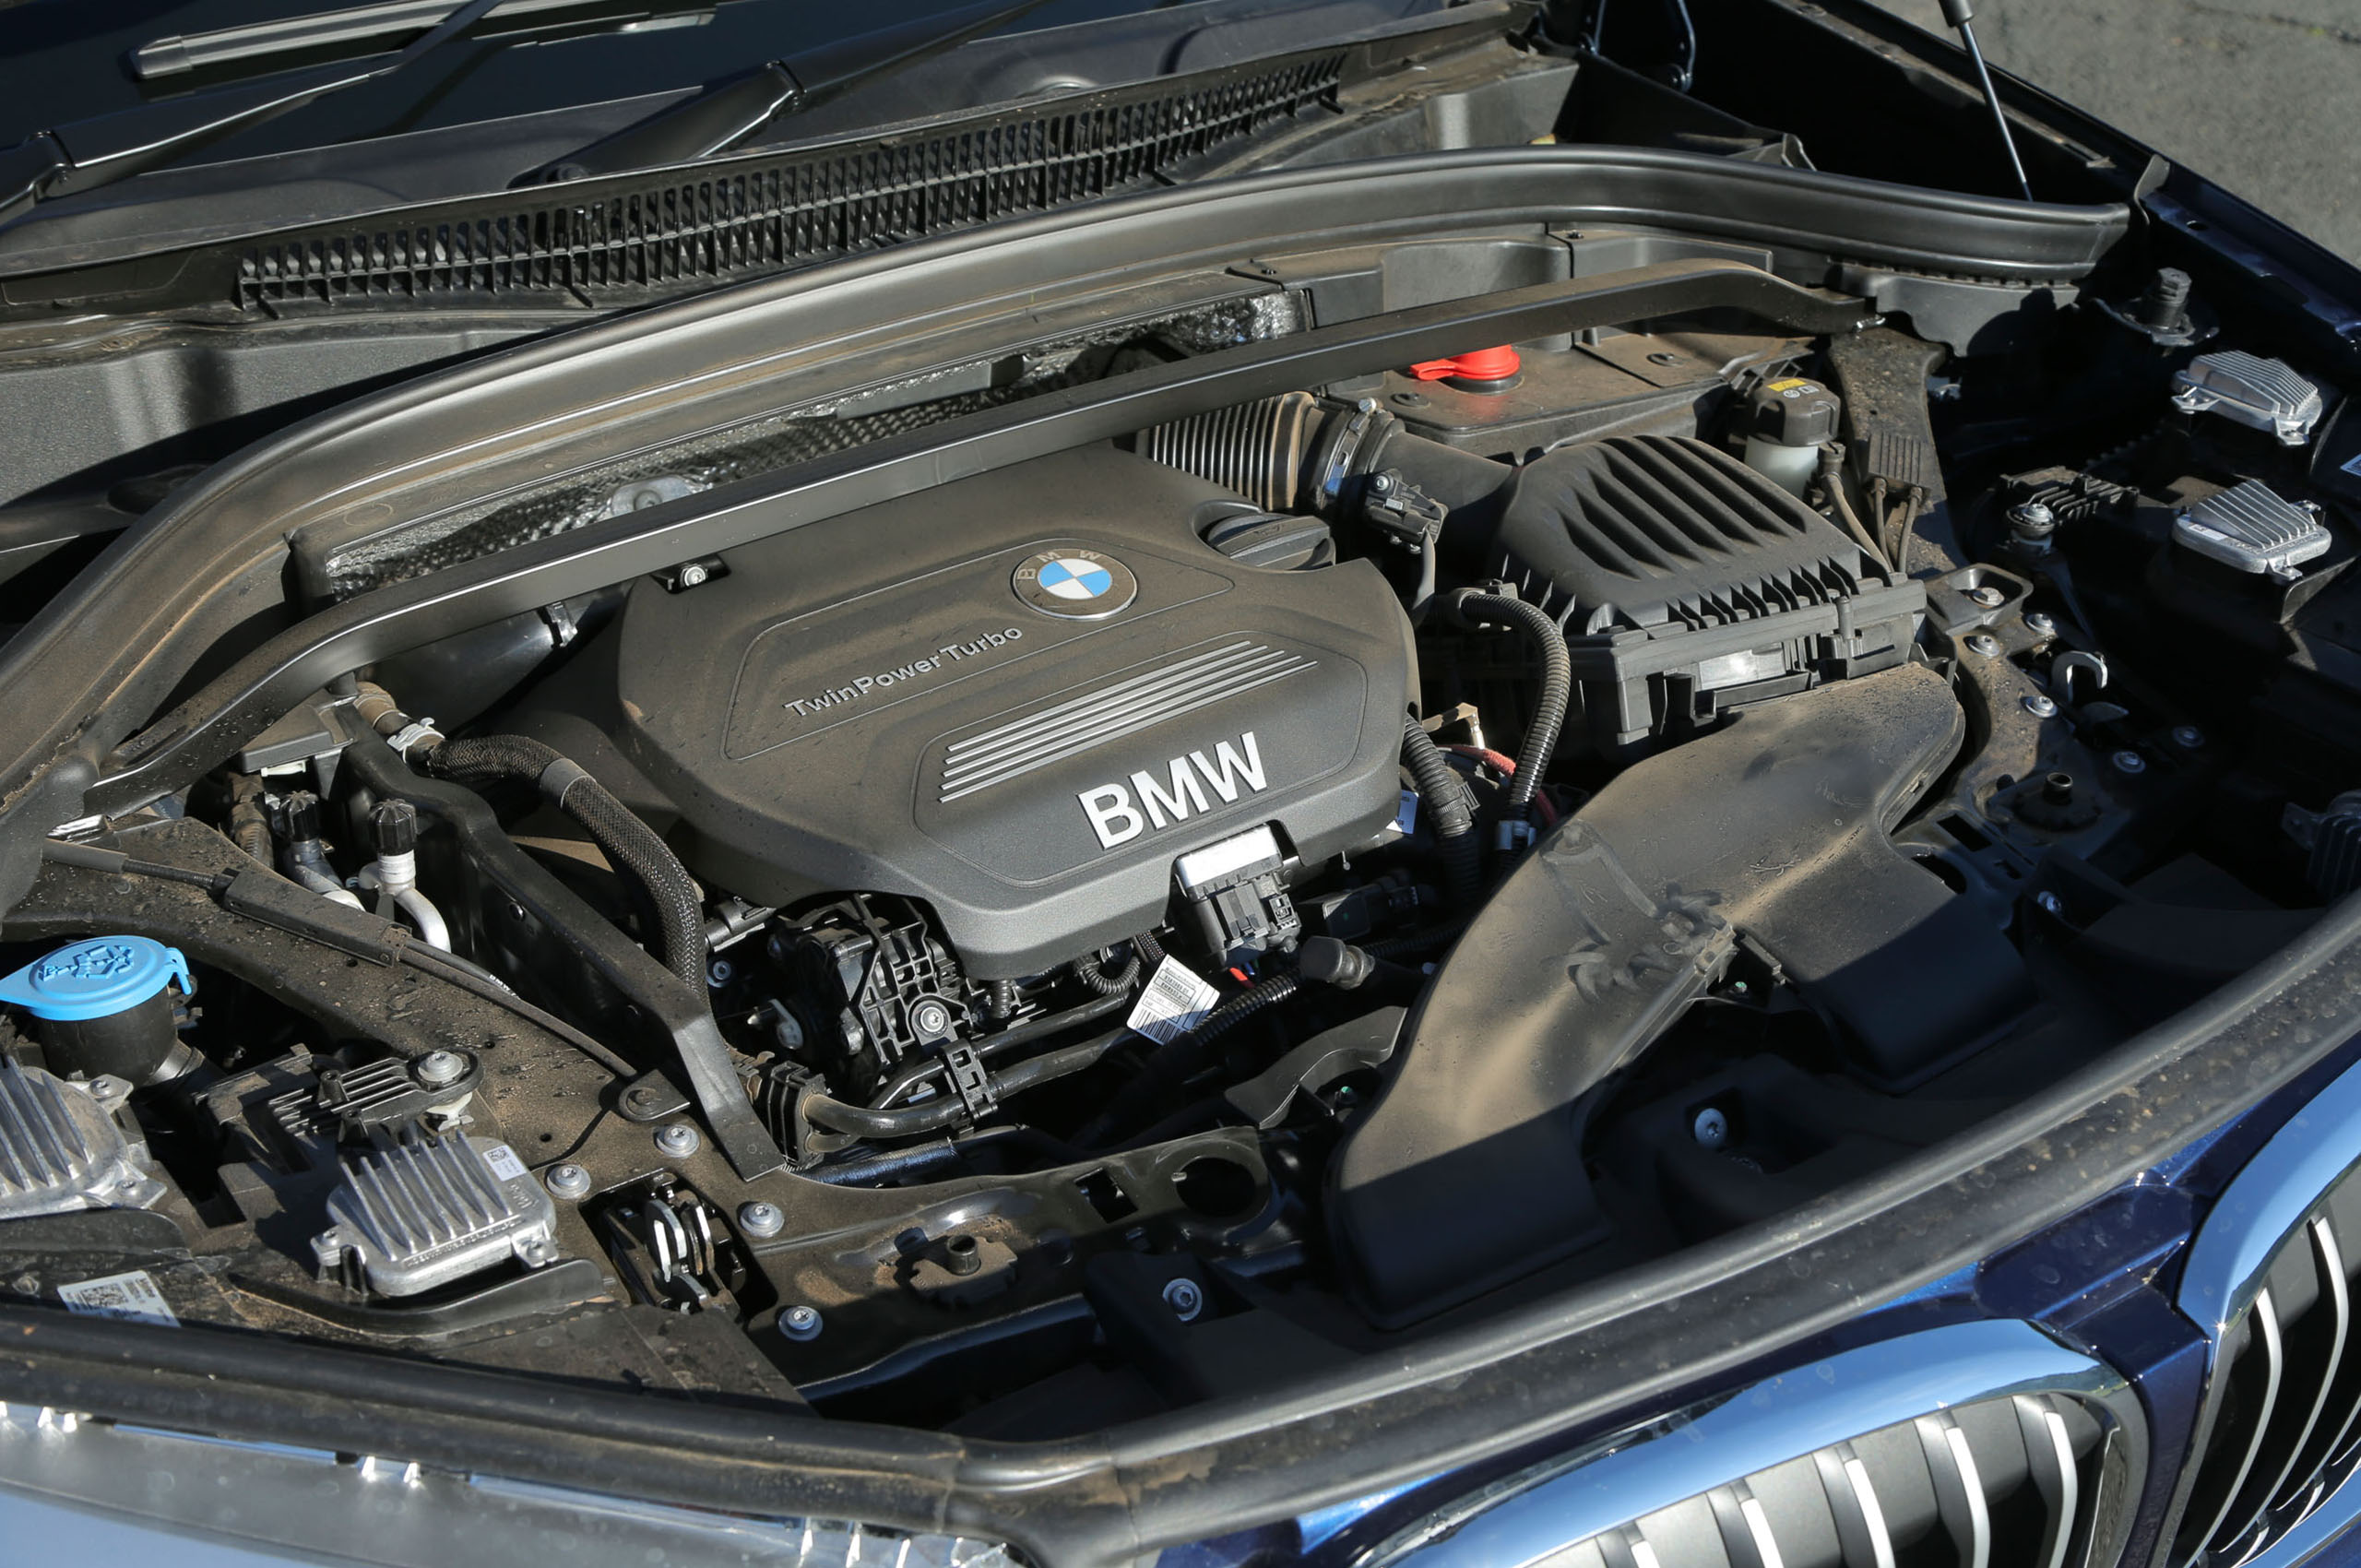 The 2.0-litre bi-turbo diesel engine in our BMW X1